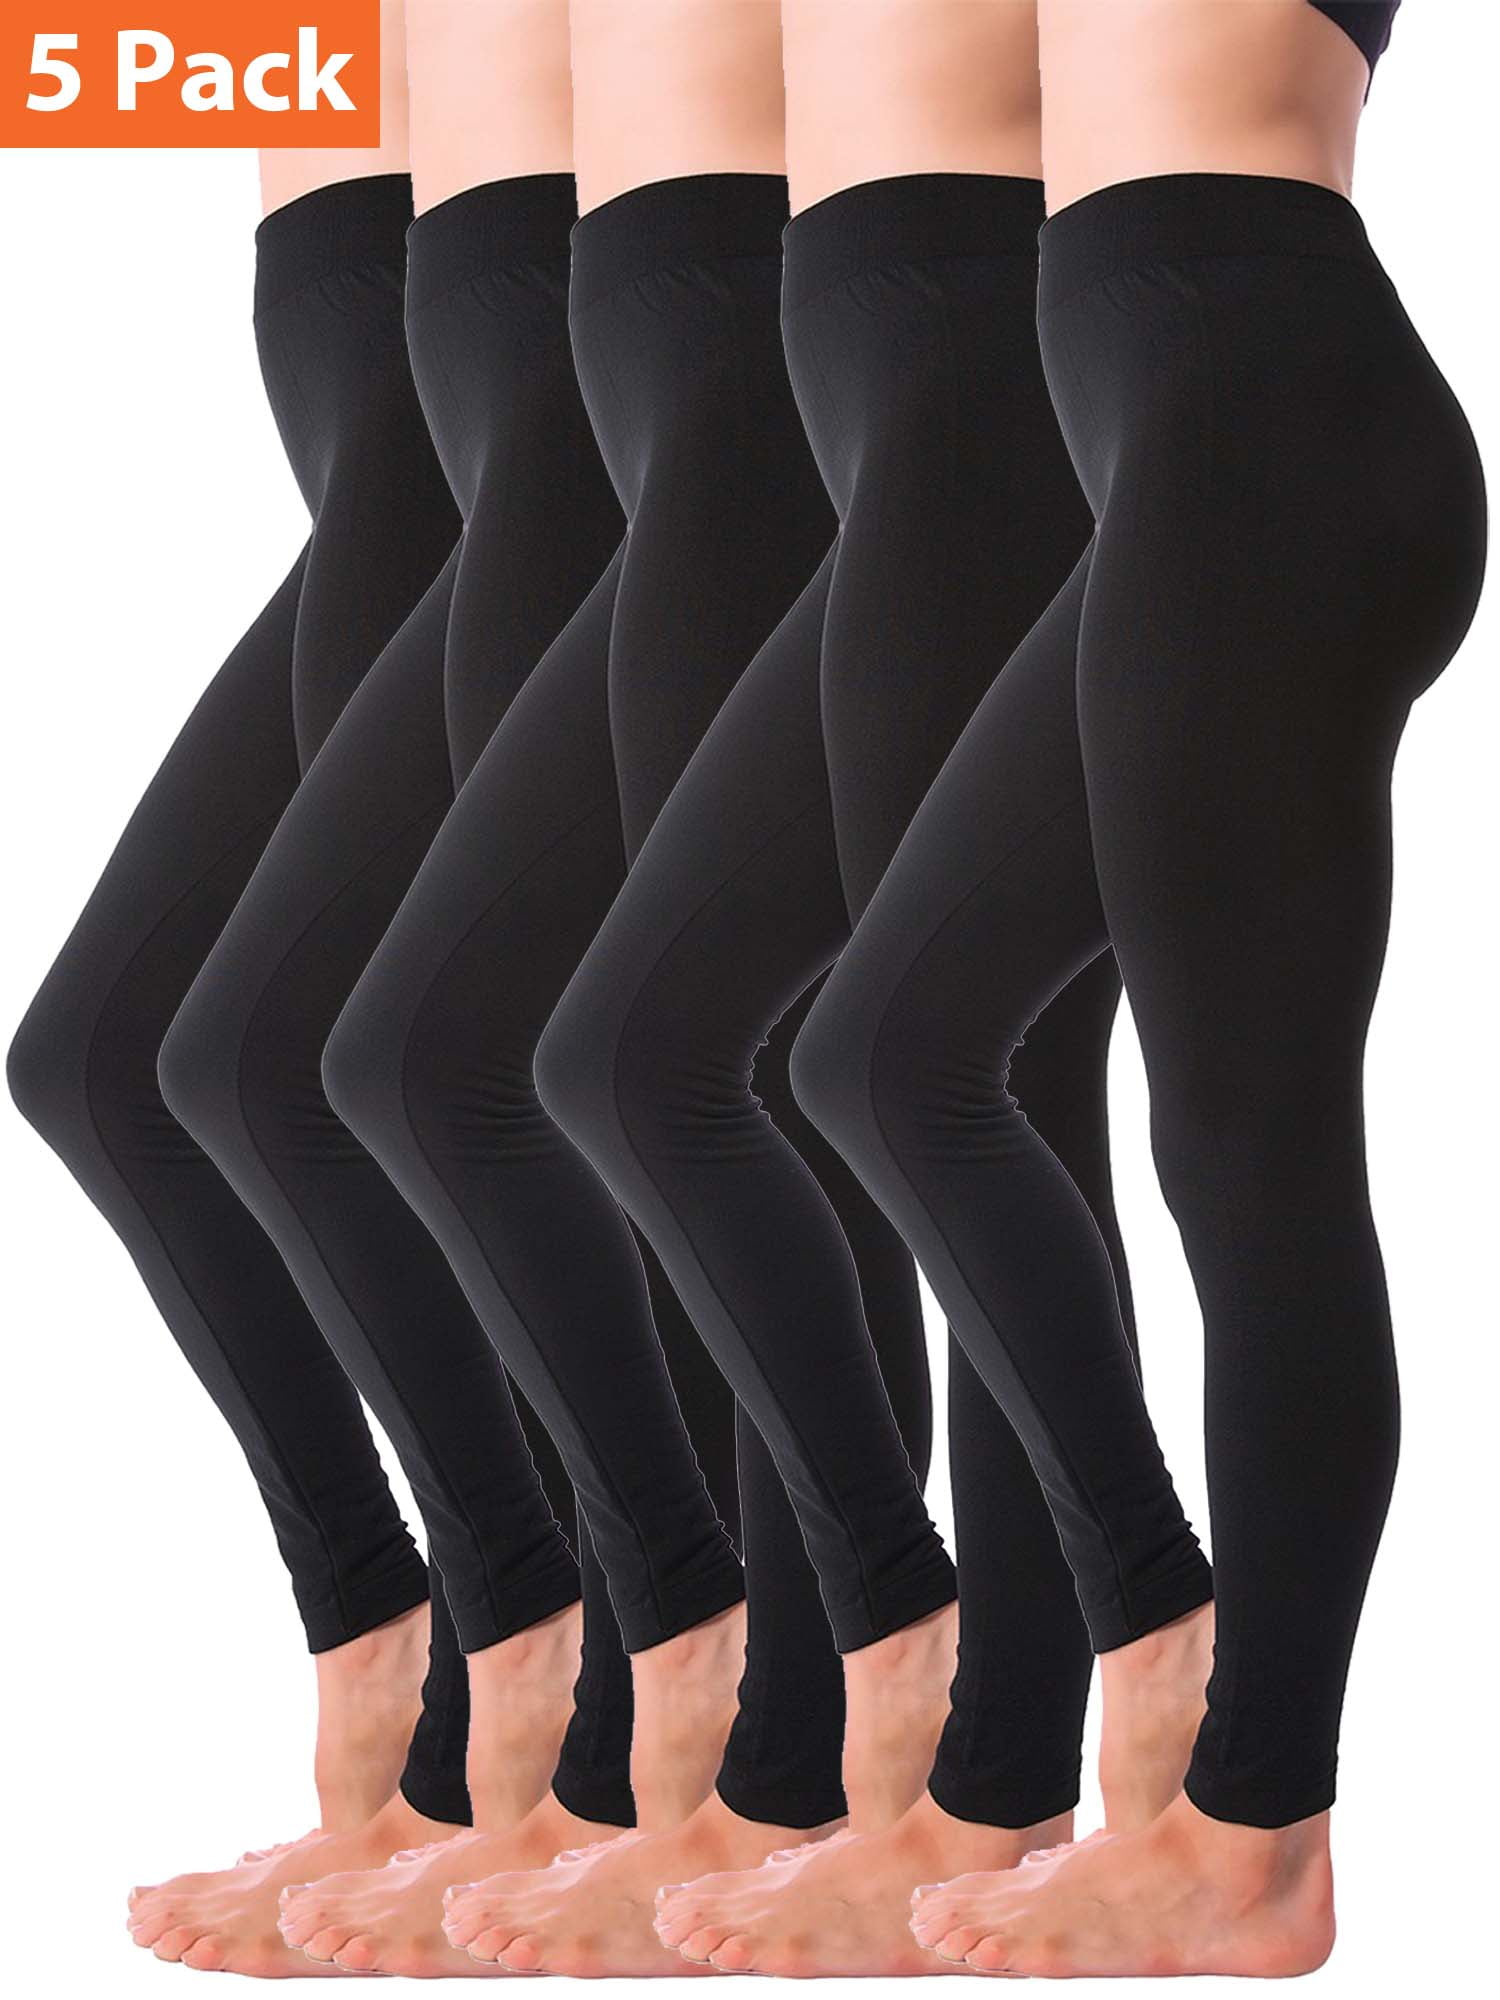 Ladies Women's Winter Warming Fleece Lined Thick Thermal Full Foot Tights S-XXL 